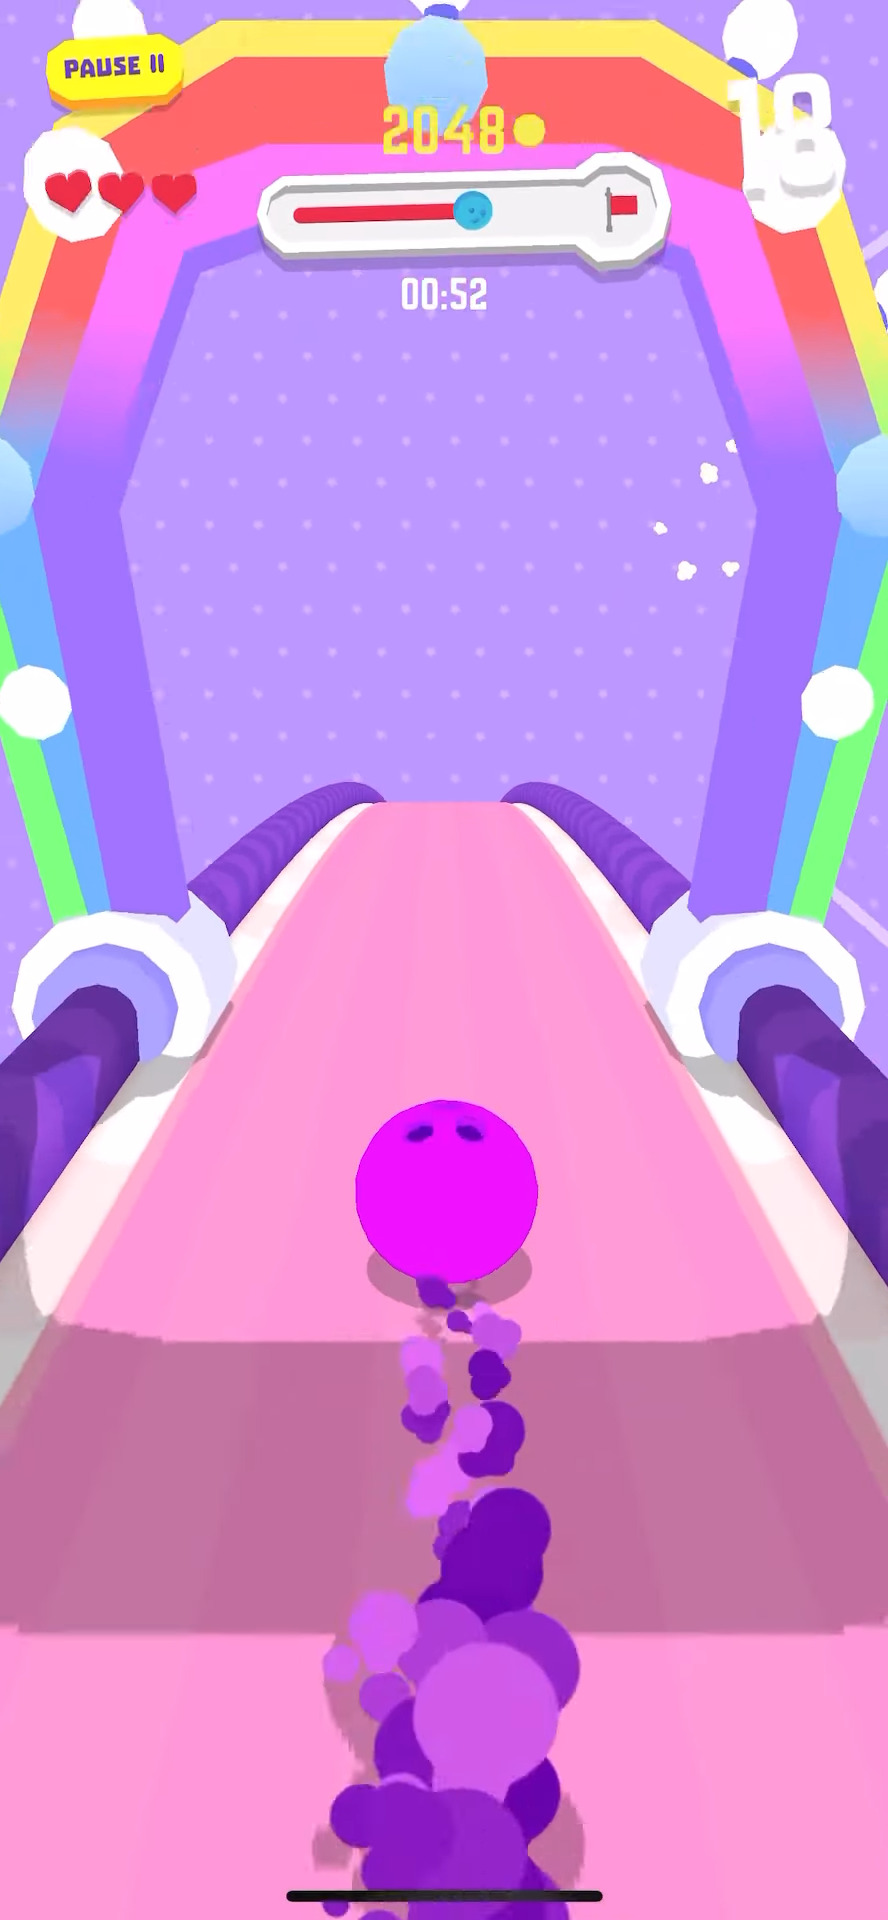 Gameplay of the Bowling Ballers for Android phone or tablet.